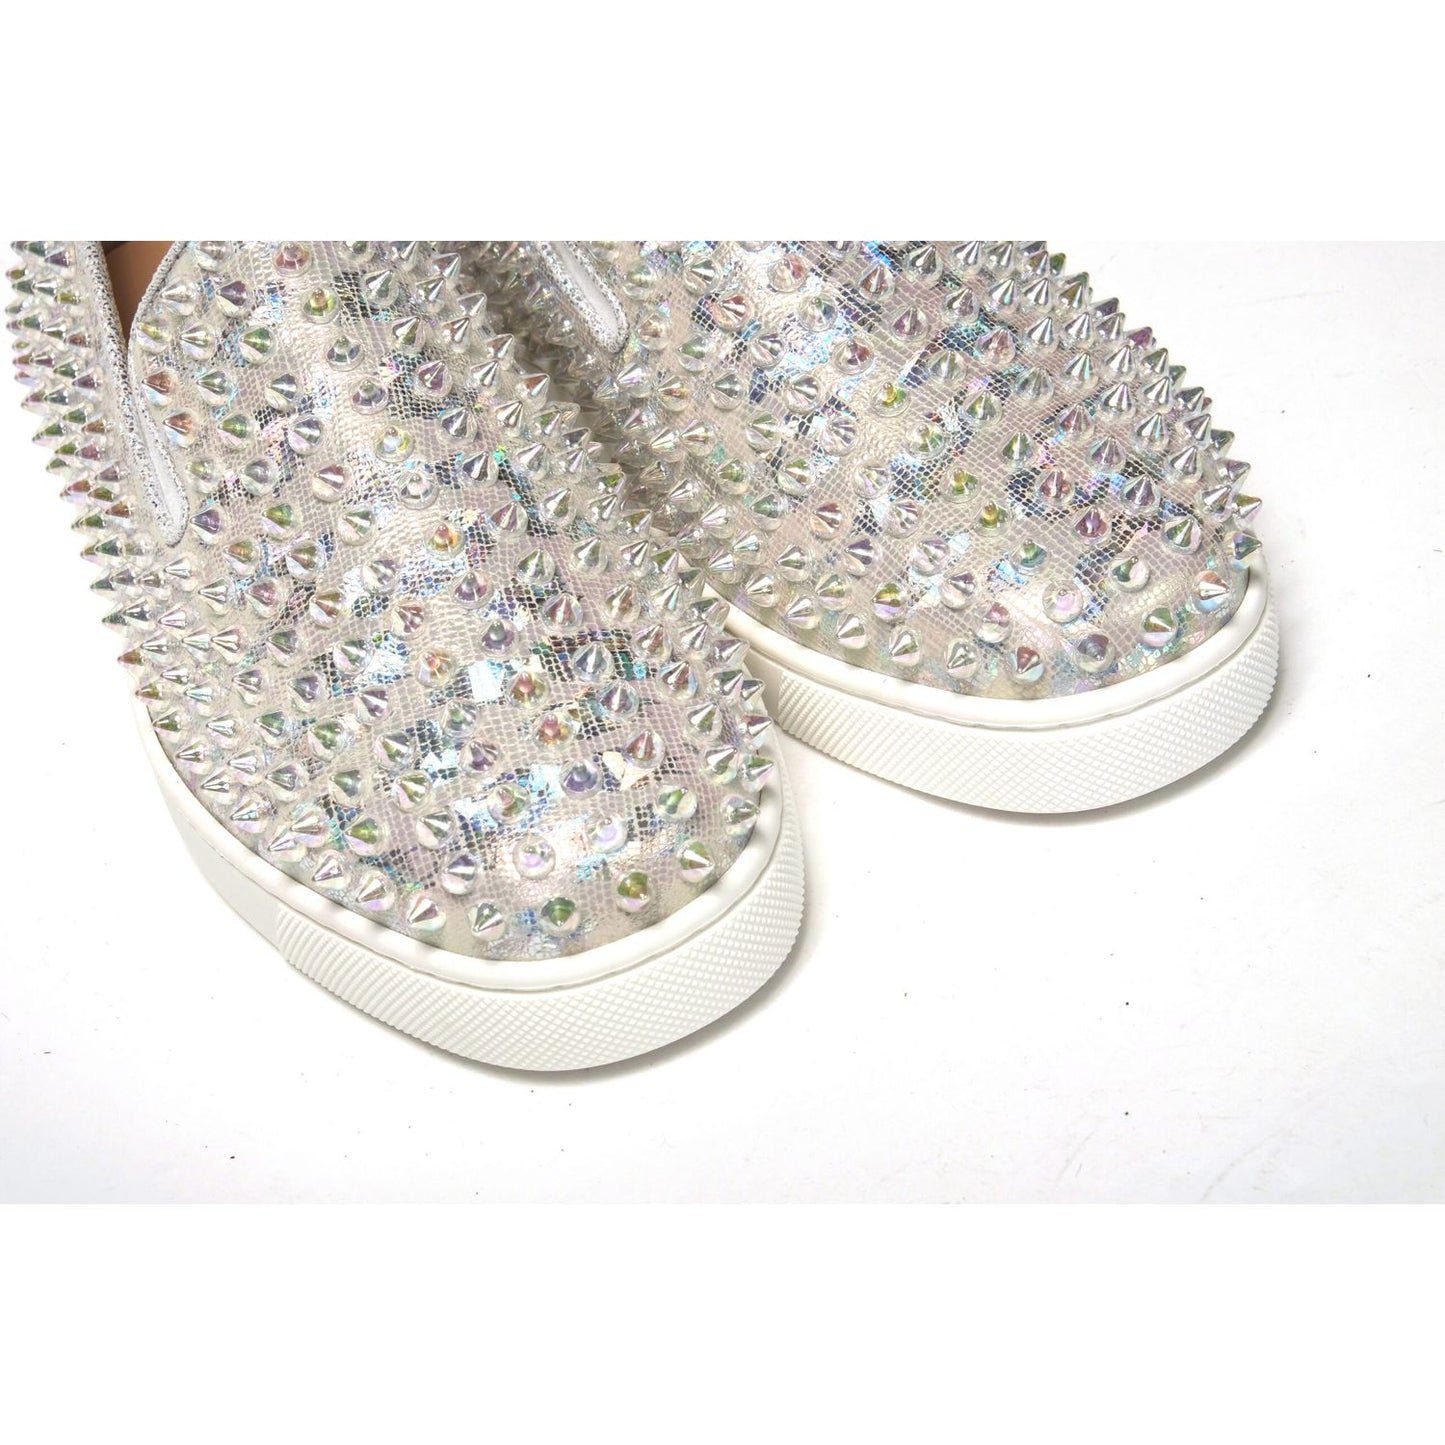 White Ab/Clear Ab Roller Boat Woman Flat Sneaker